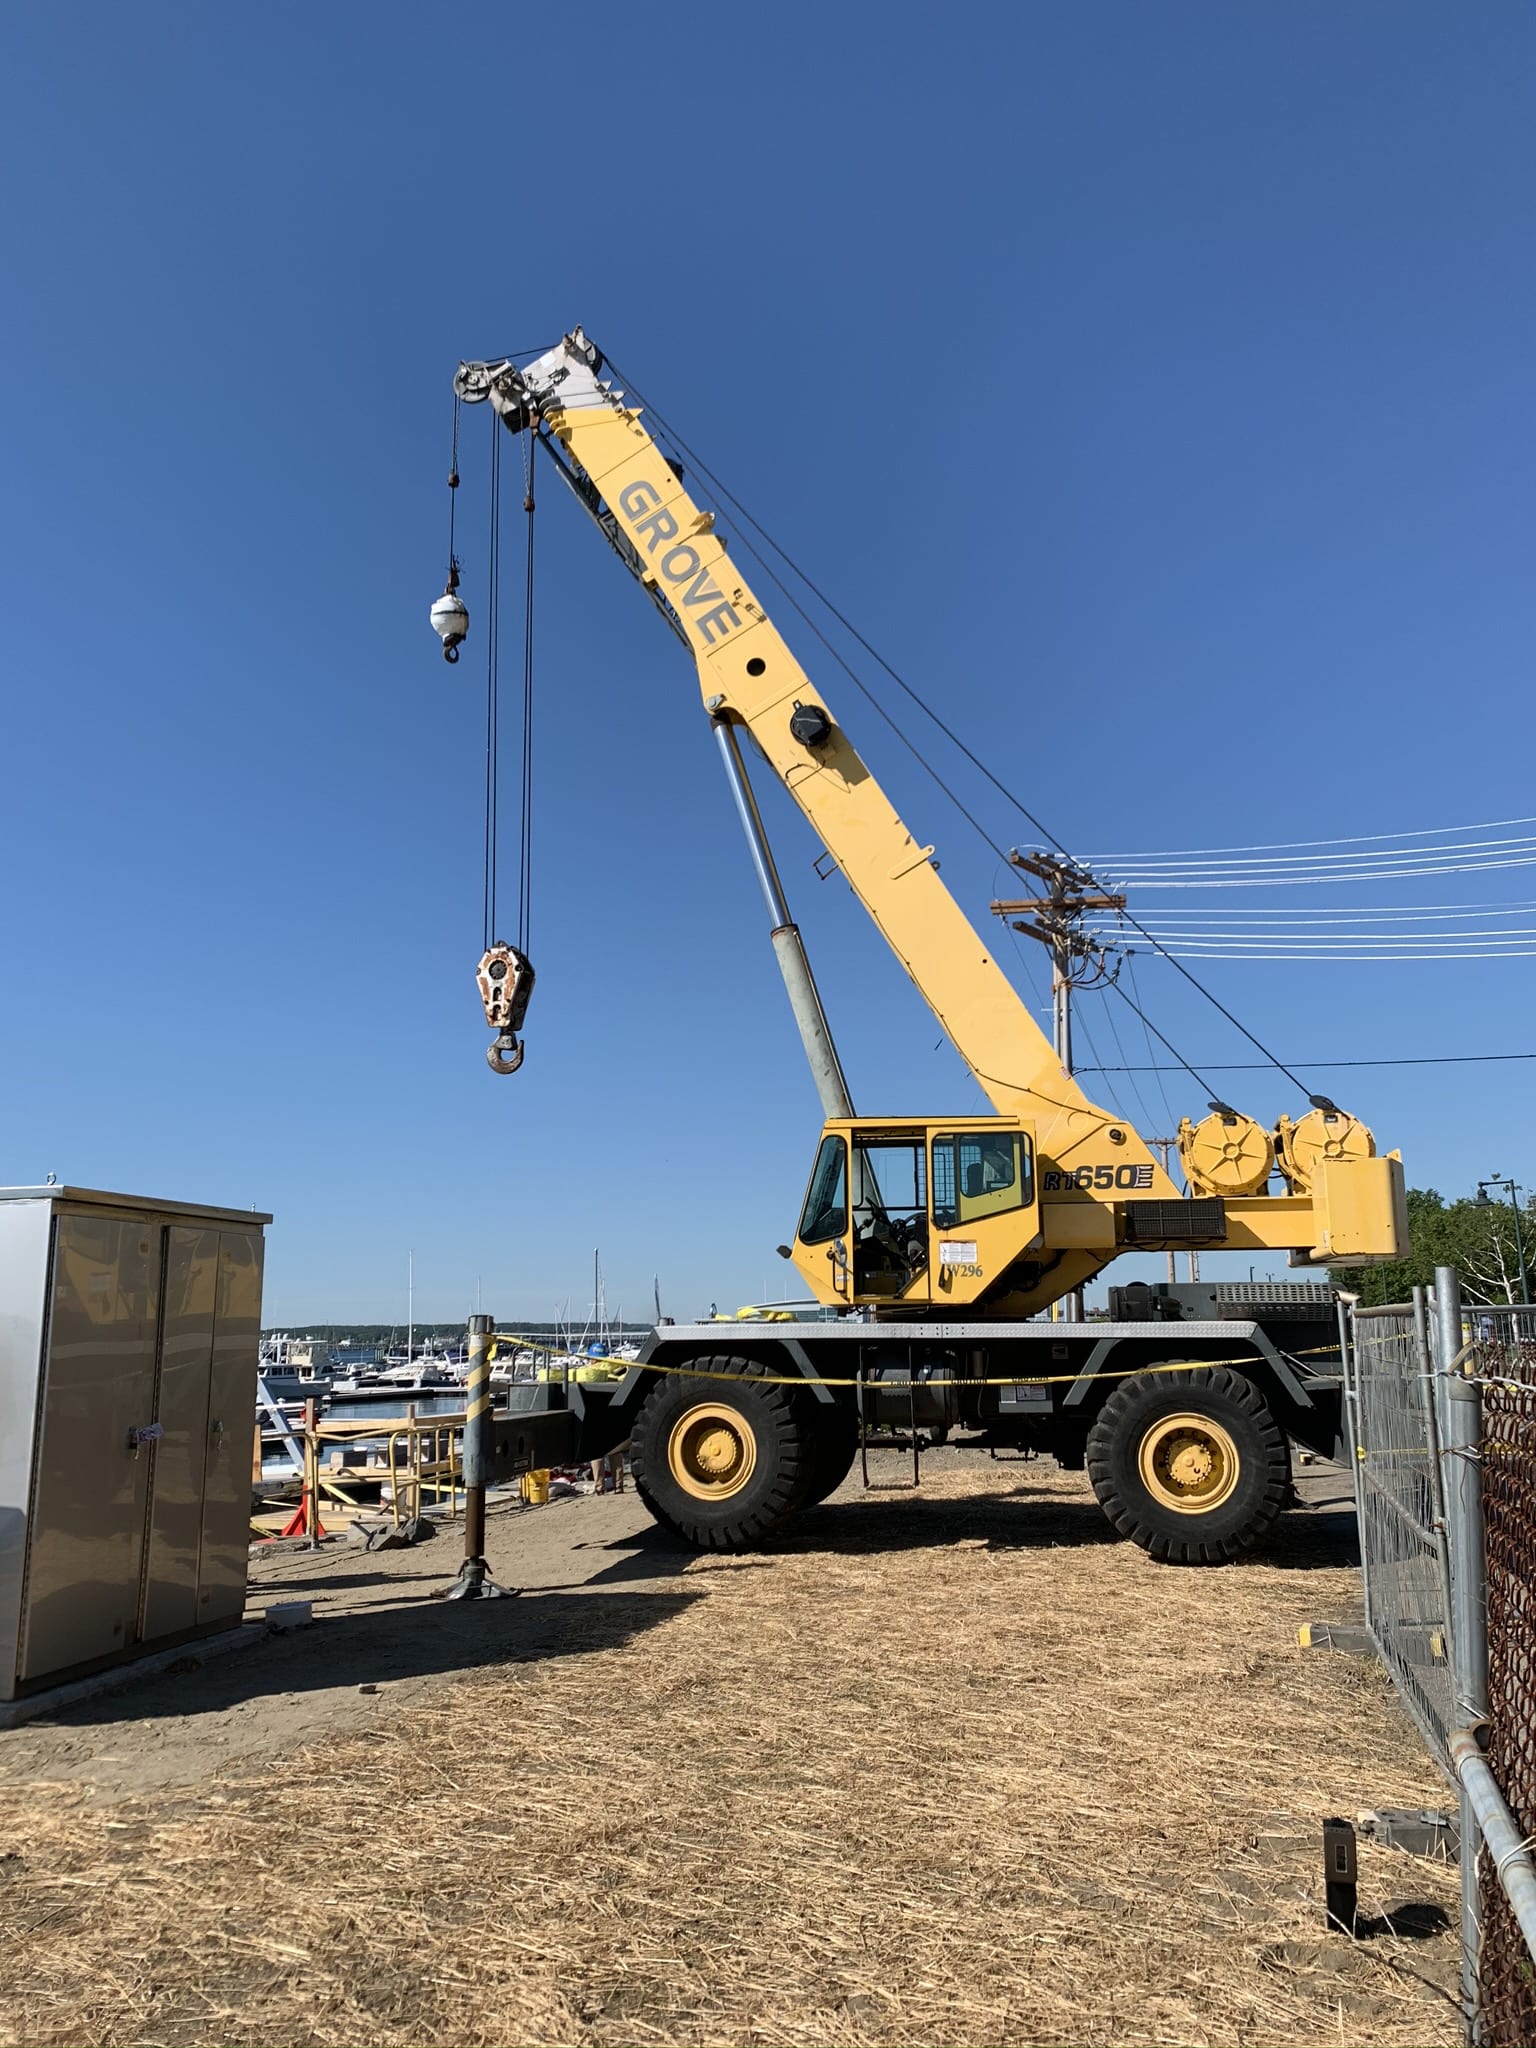 Mayo enterprises crane supporting a construction project in portland maine